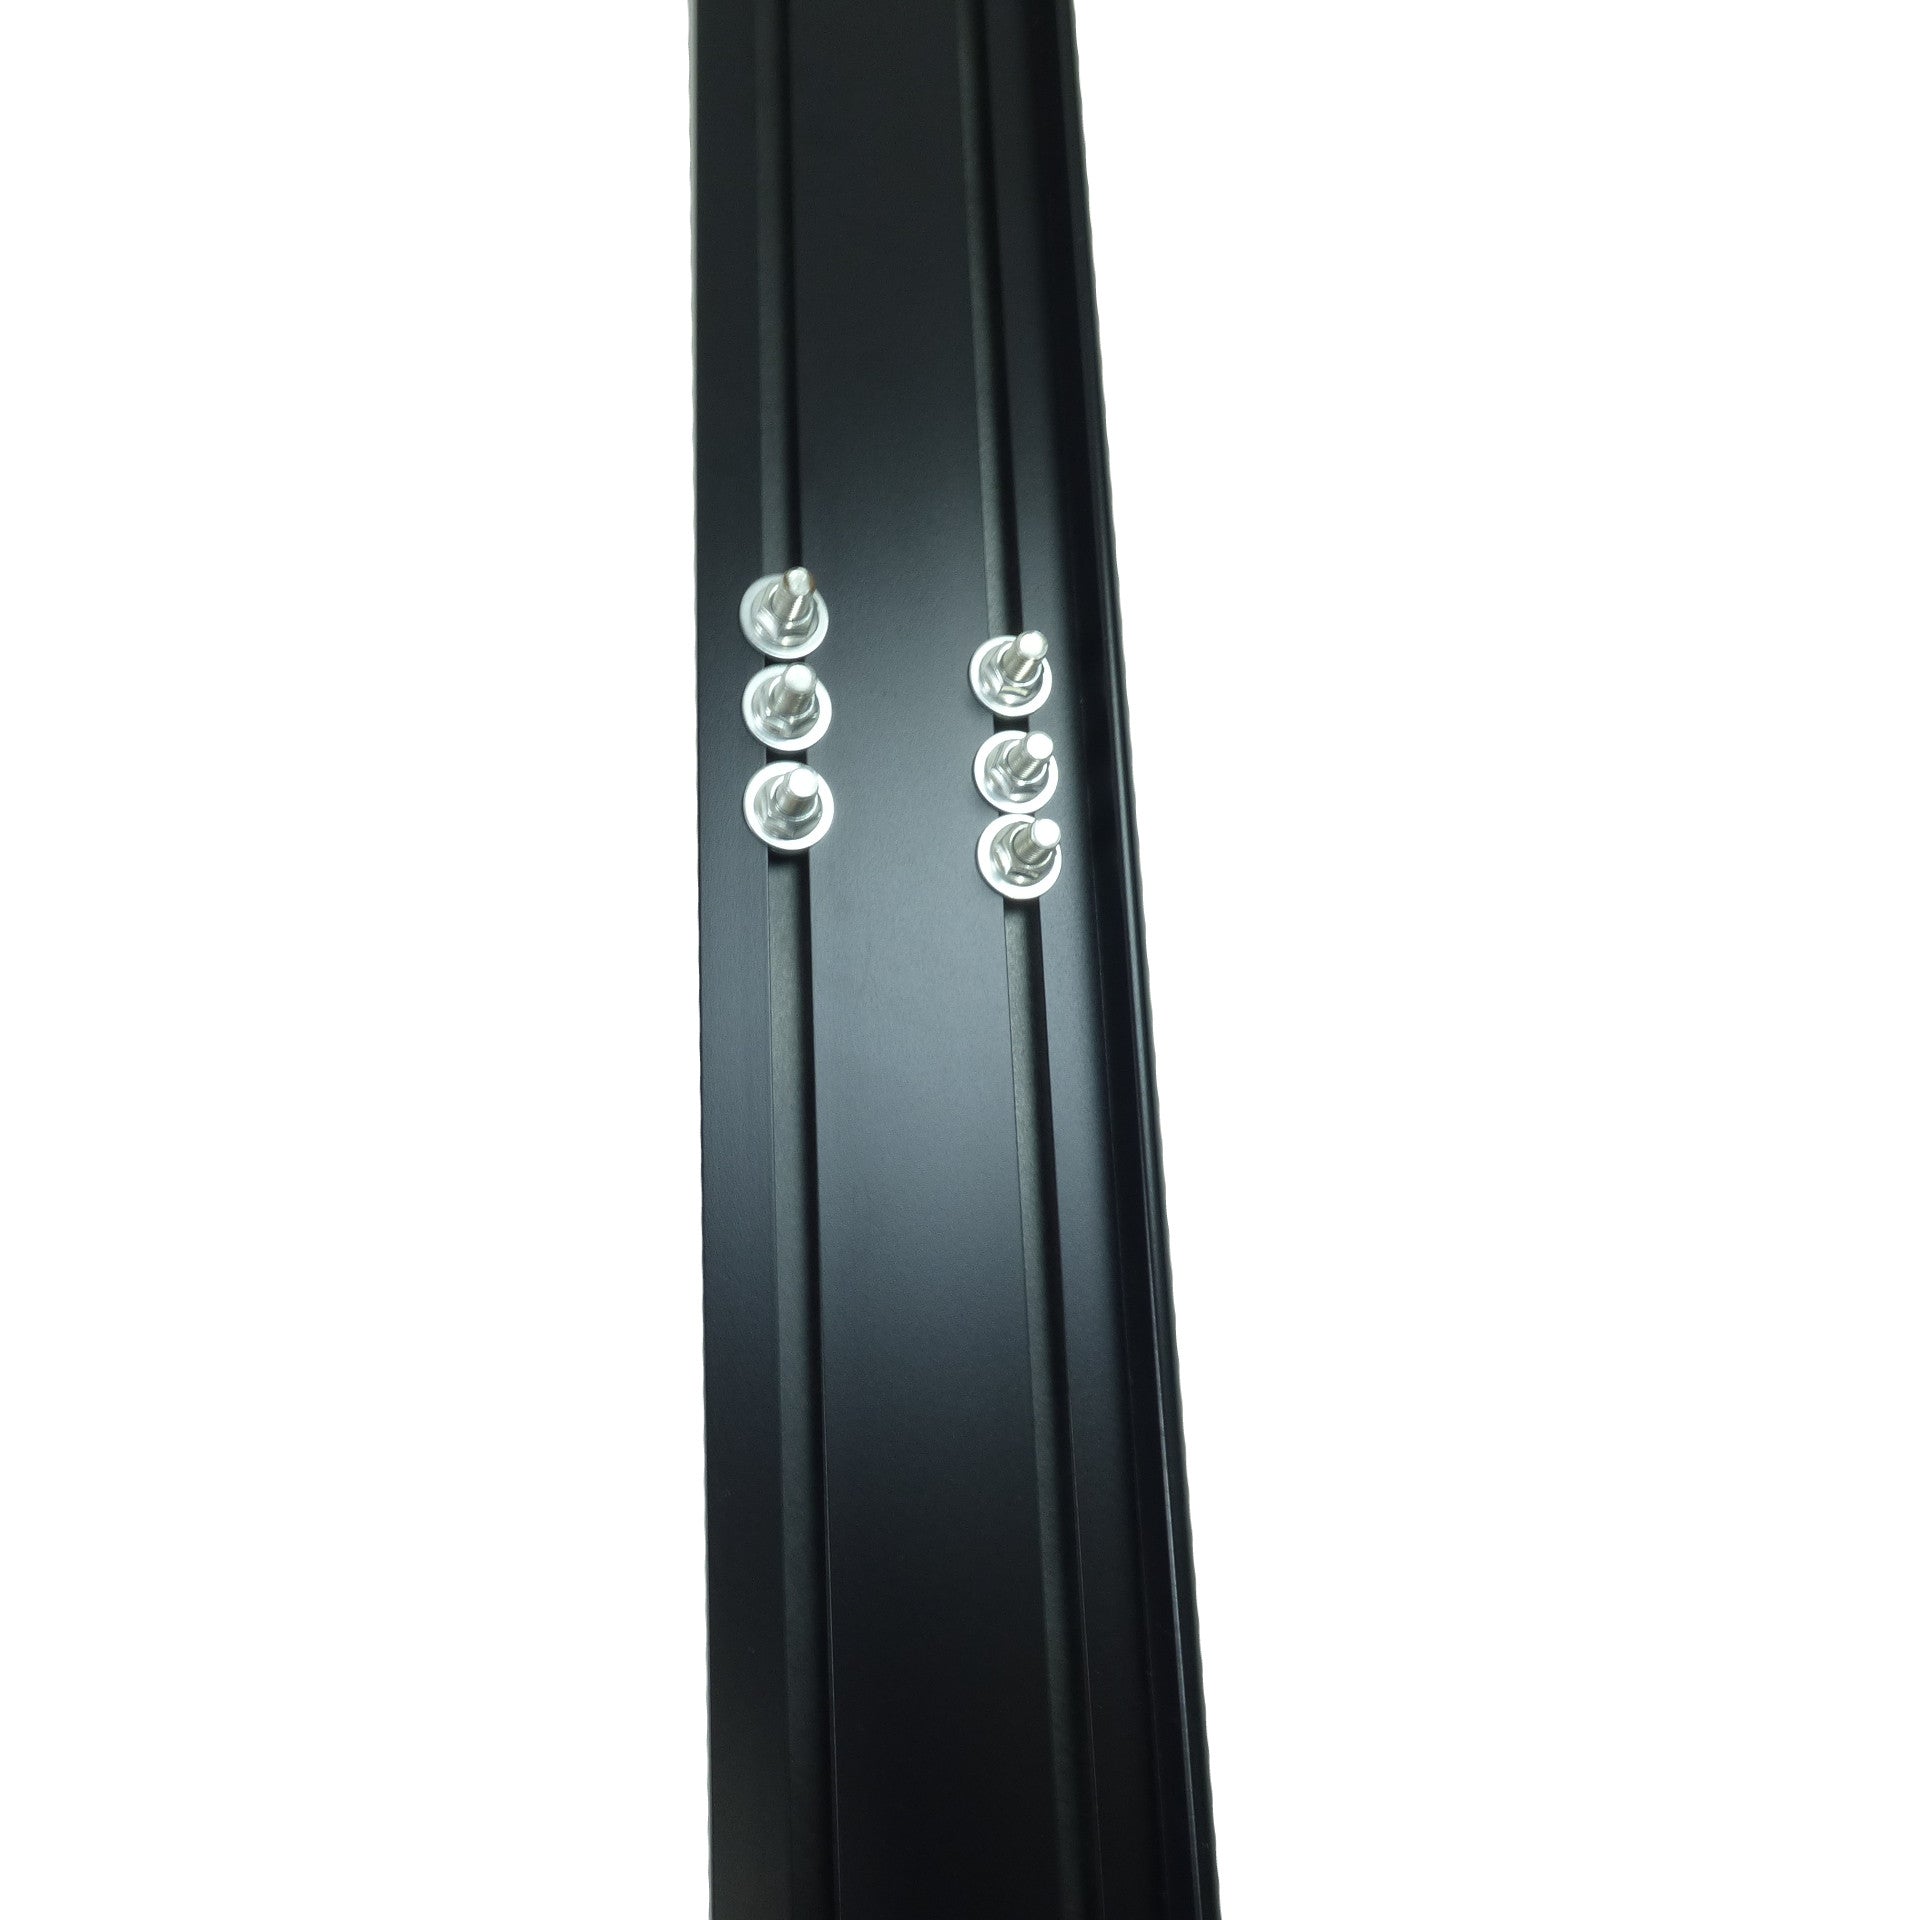 Orca Side Steps Running Boards for the Land Rover Defender 110 2020+ -  - sold by Direct4x4